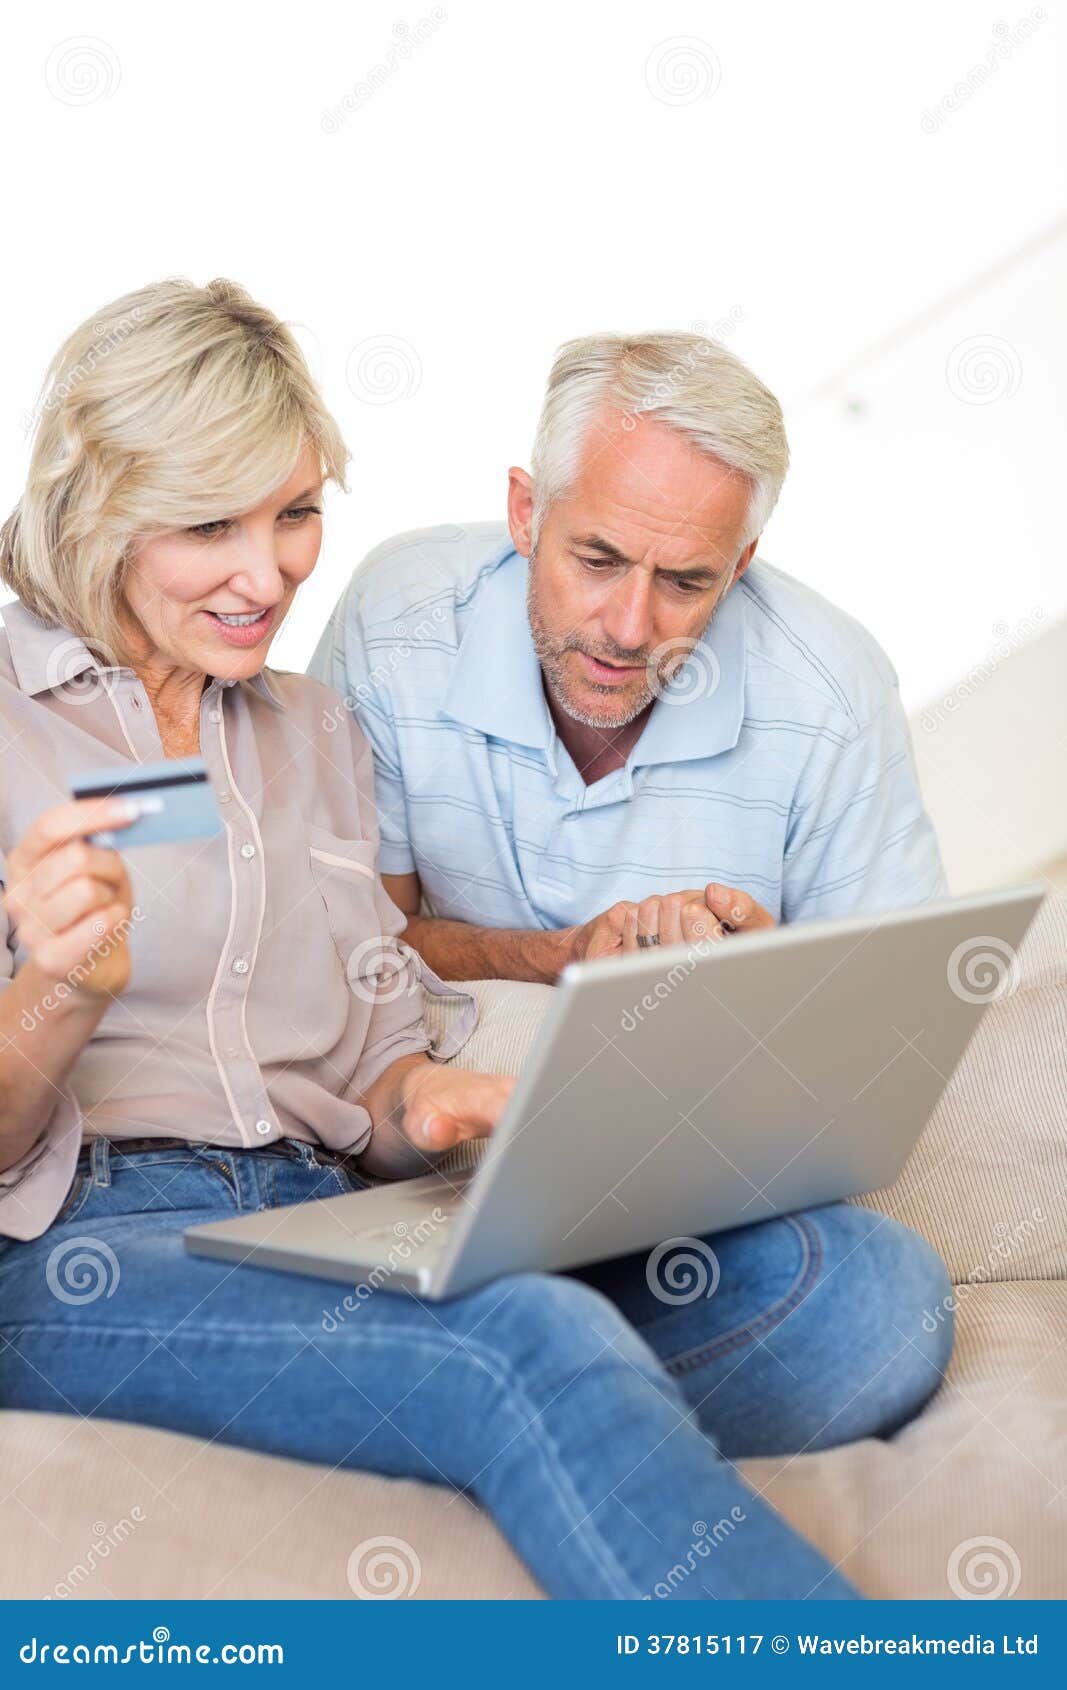 Mature Couple Doing Online Shopping at Home Stock Image - Image of ...